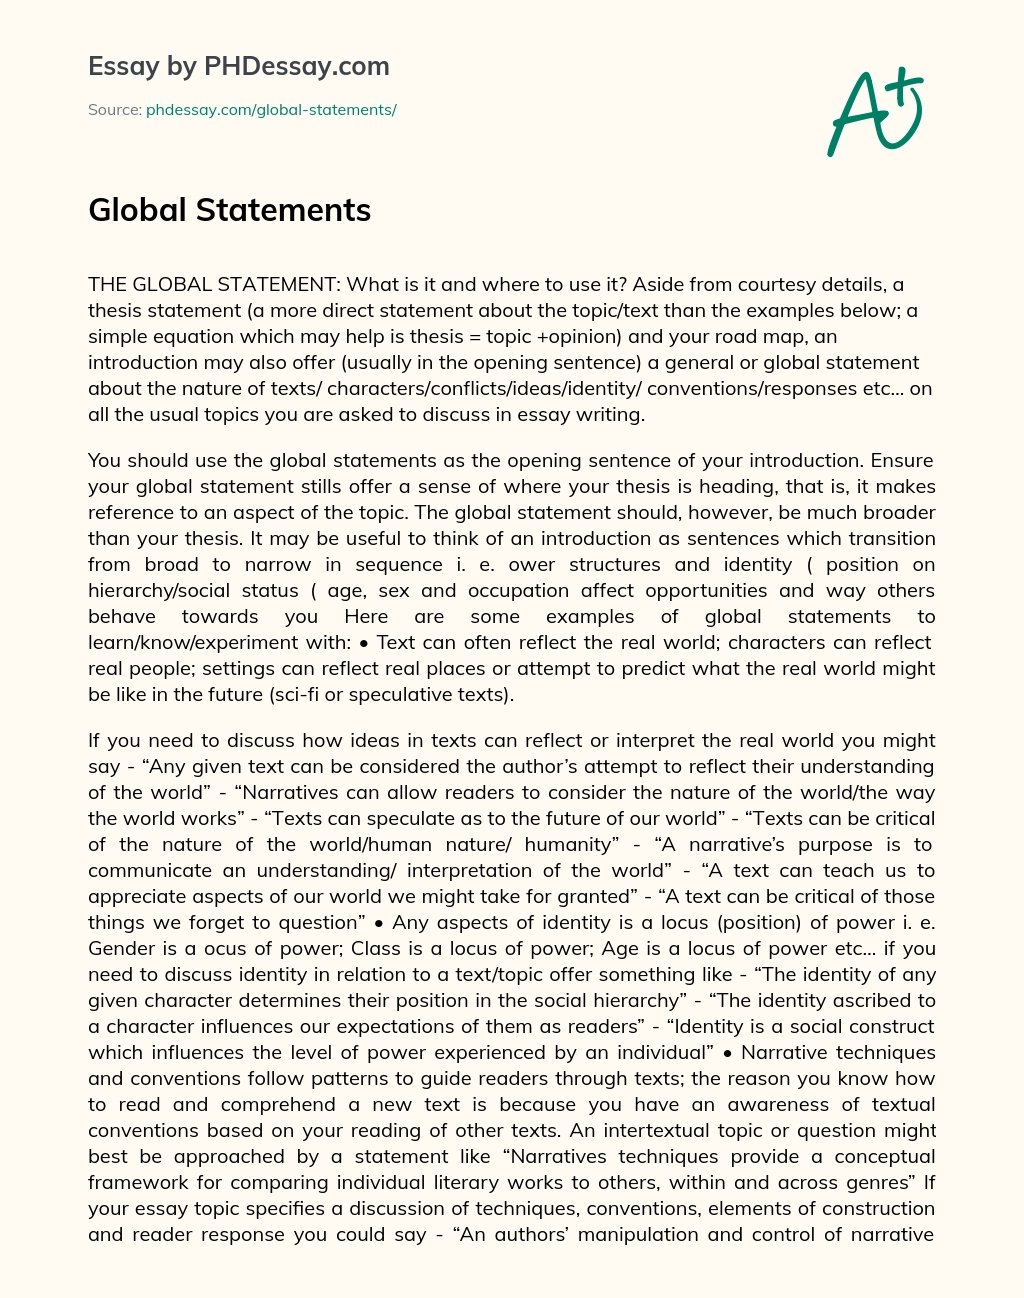 how to write a global statement in an essay